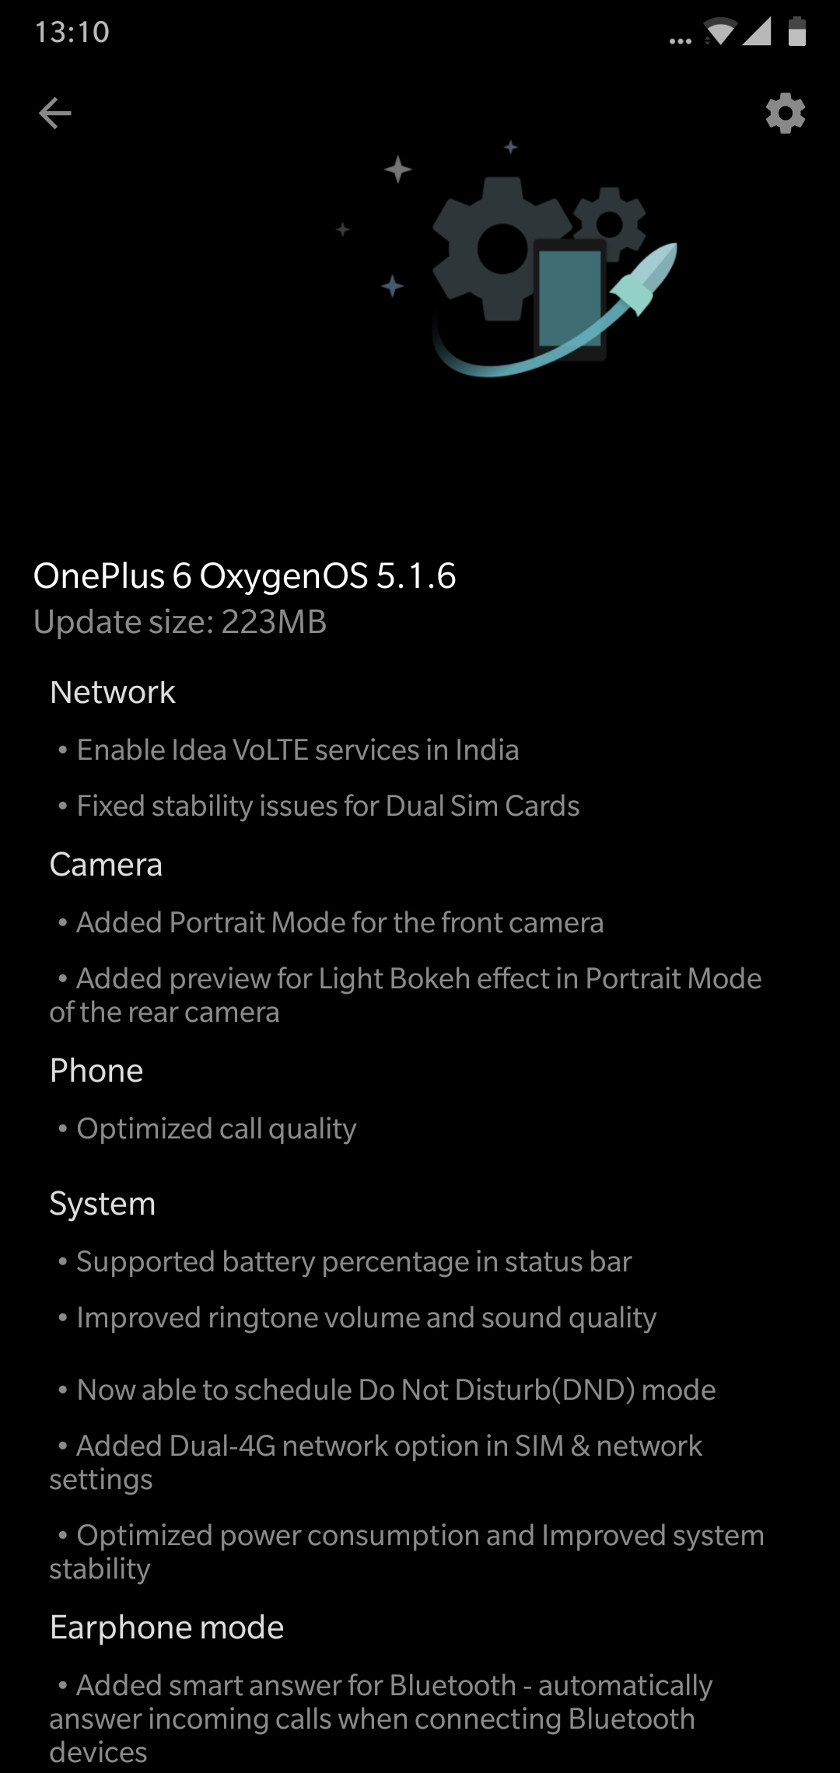 The Oxygen OS 5.1.6 update for OnePlus 6.